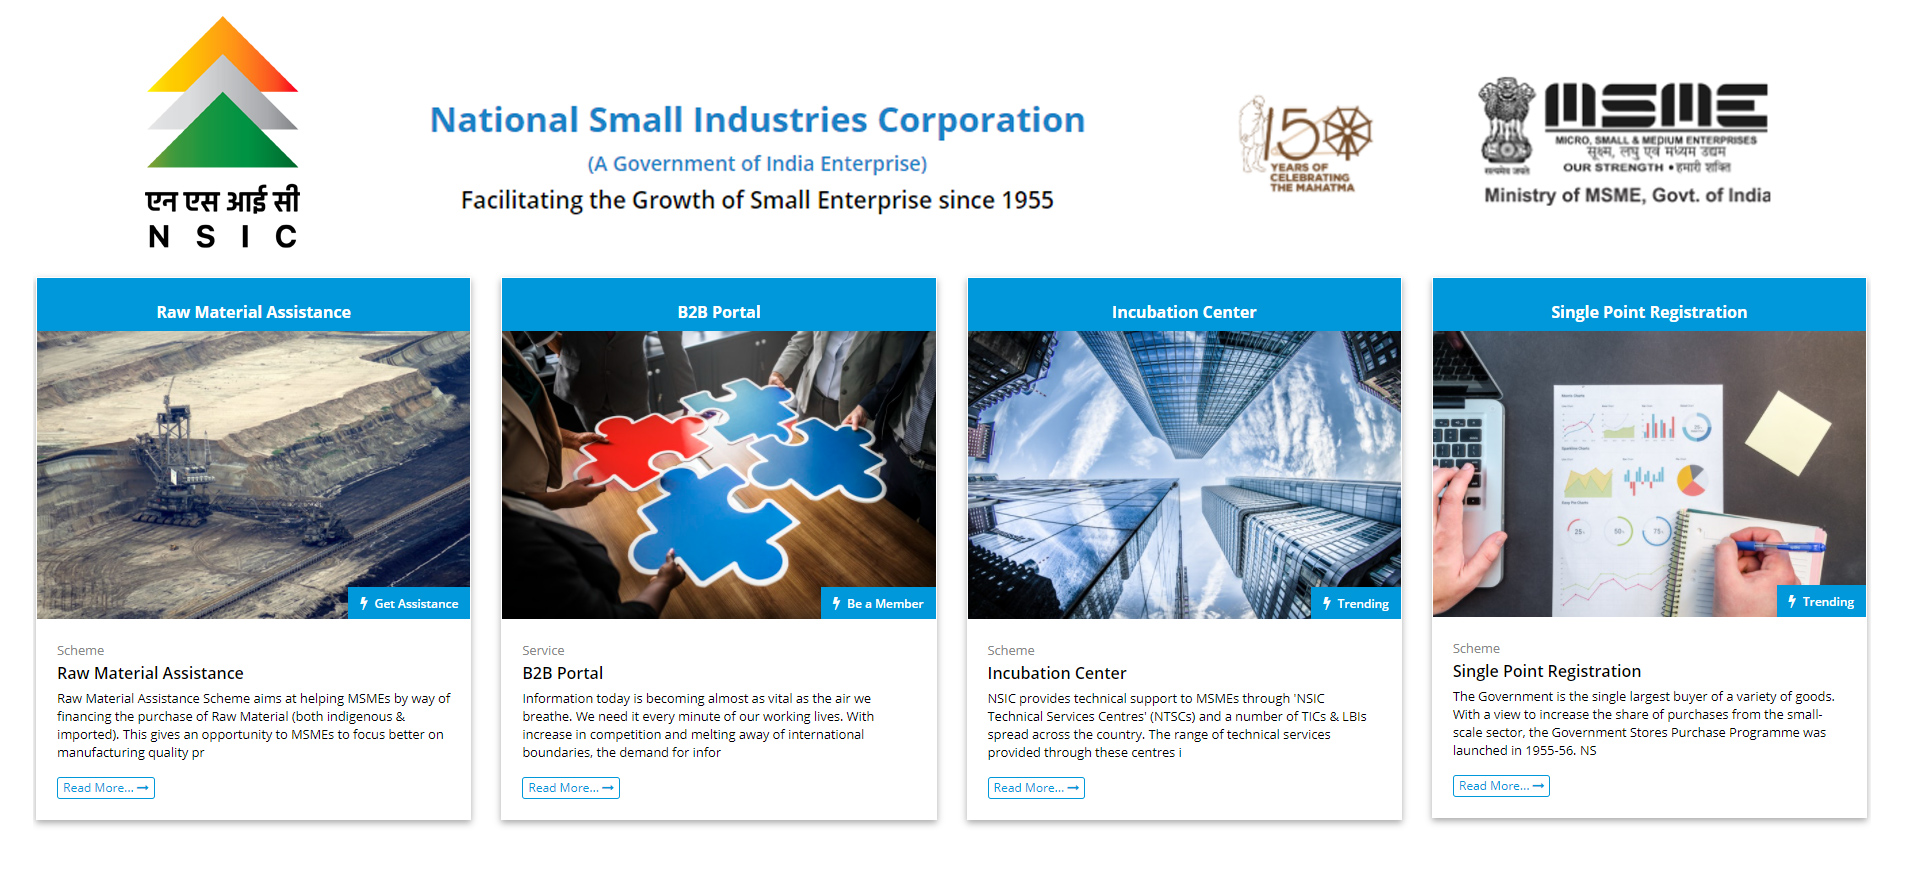 NSIC – National Small Industries Corporation